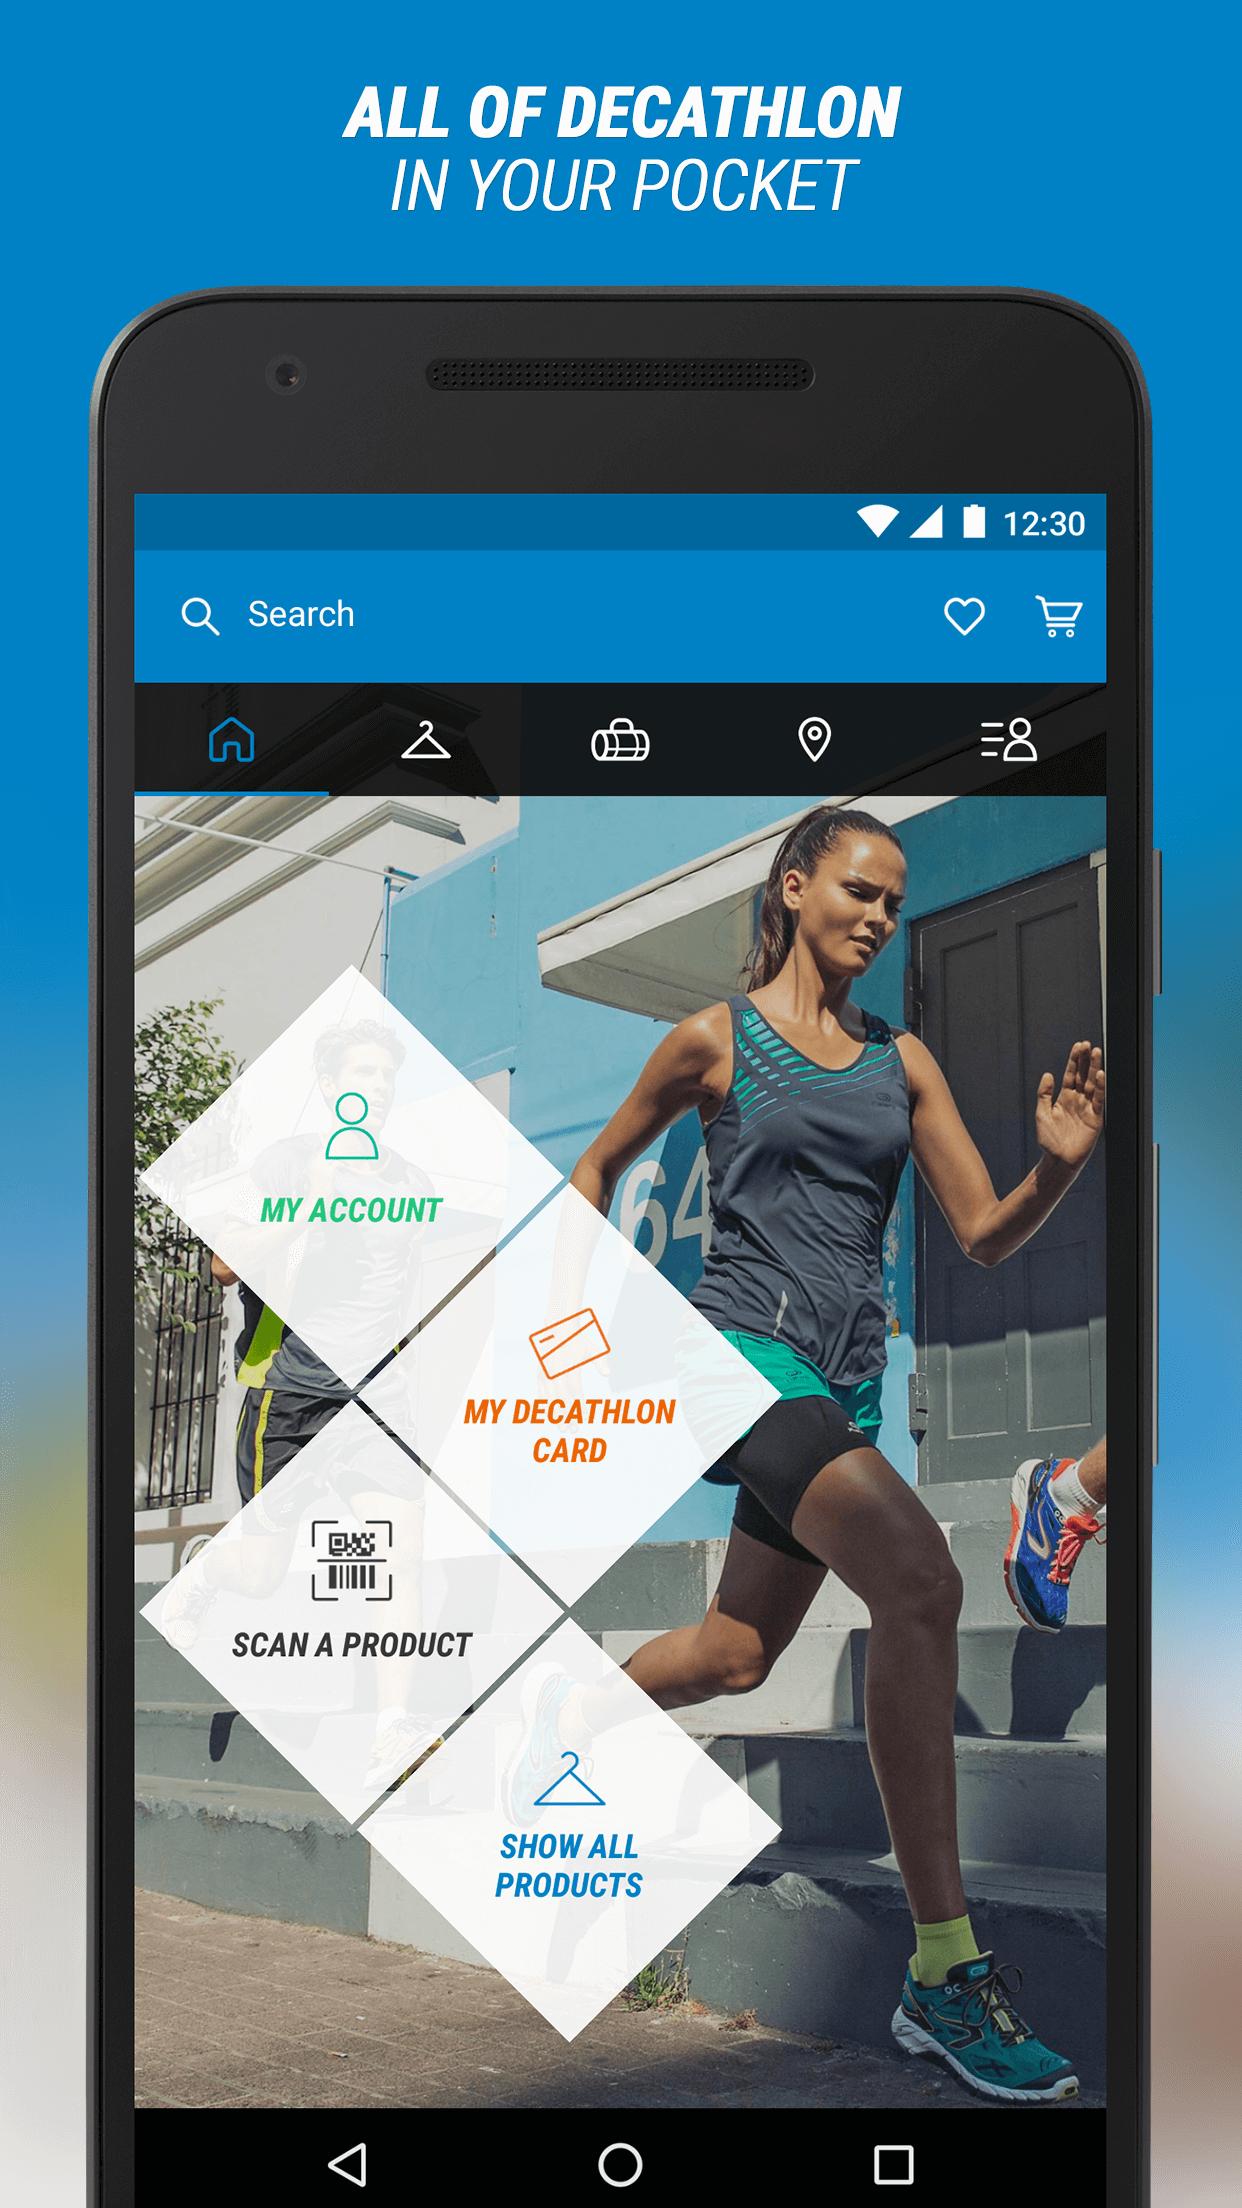 Decathlon for Android - APK Download